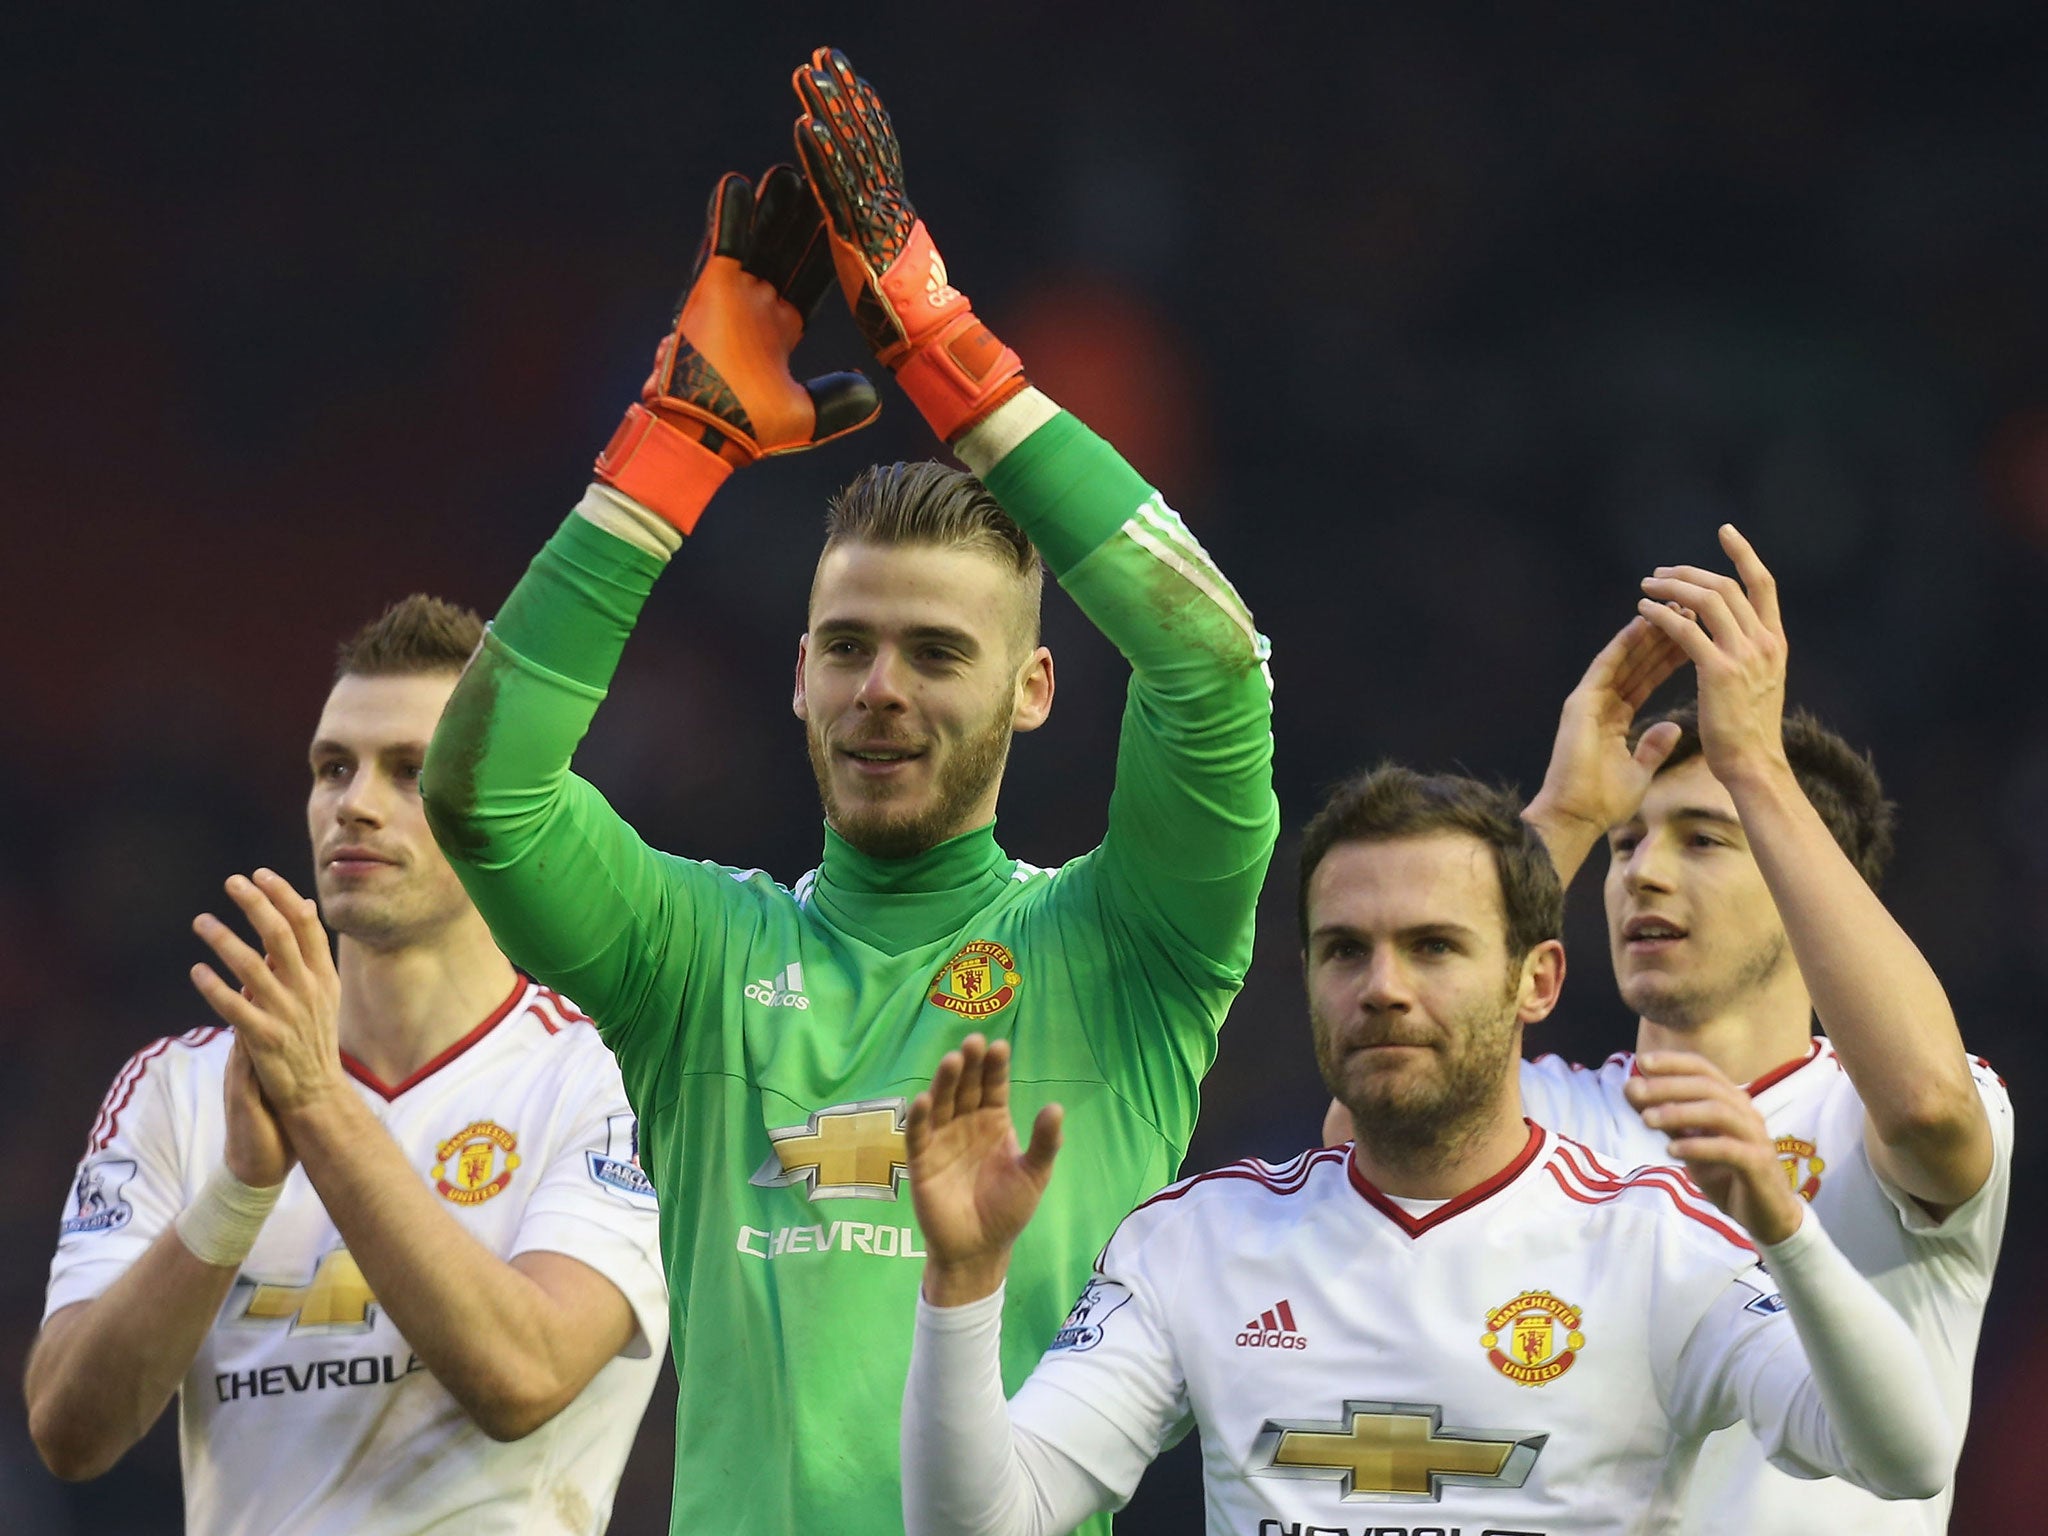 David De Gea celebrates with his Manchester United team-mates after a 1-0 win over Liverpool